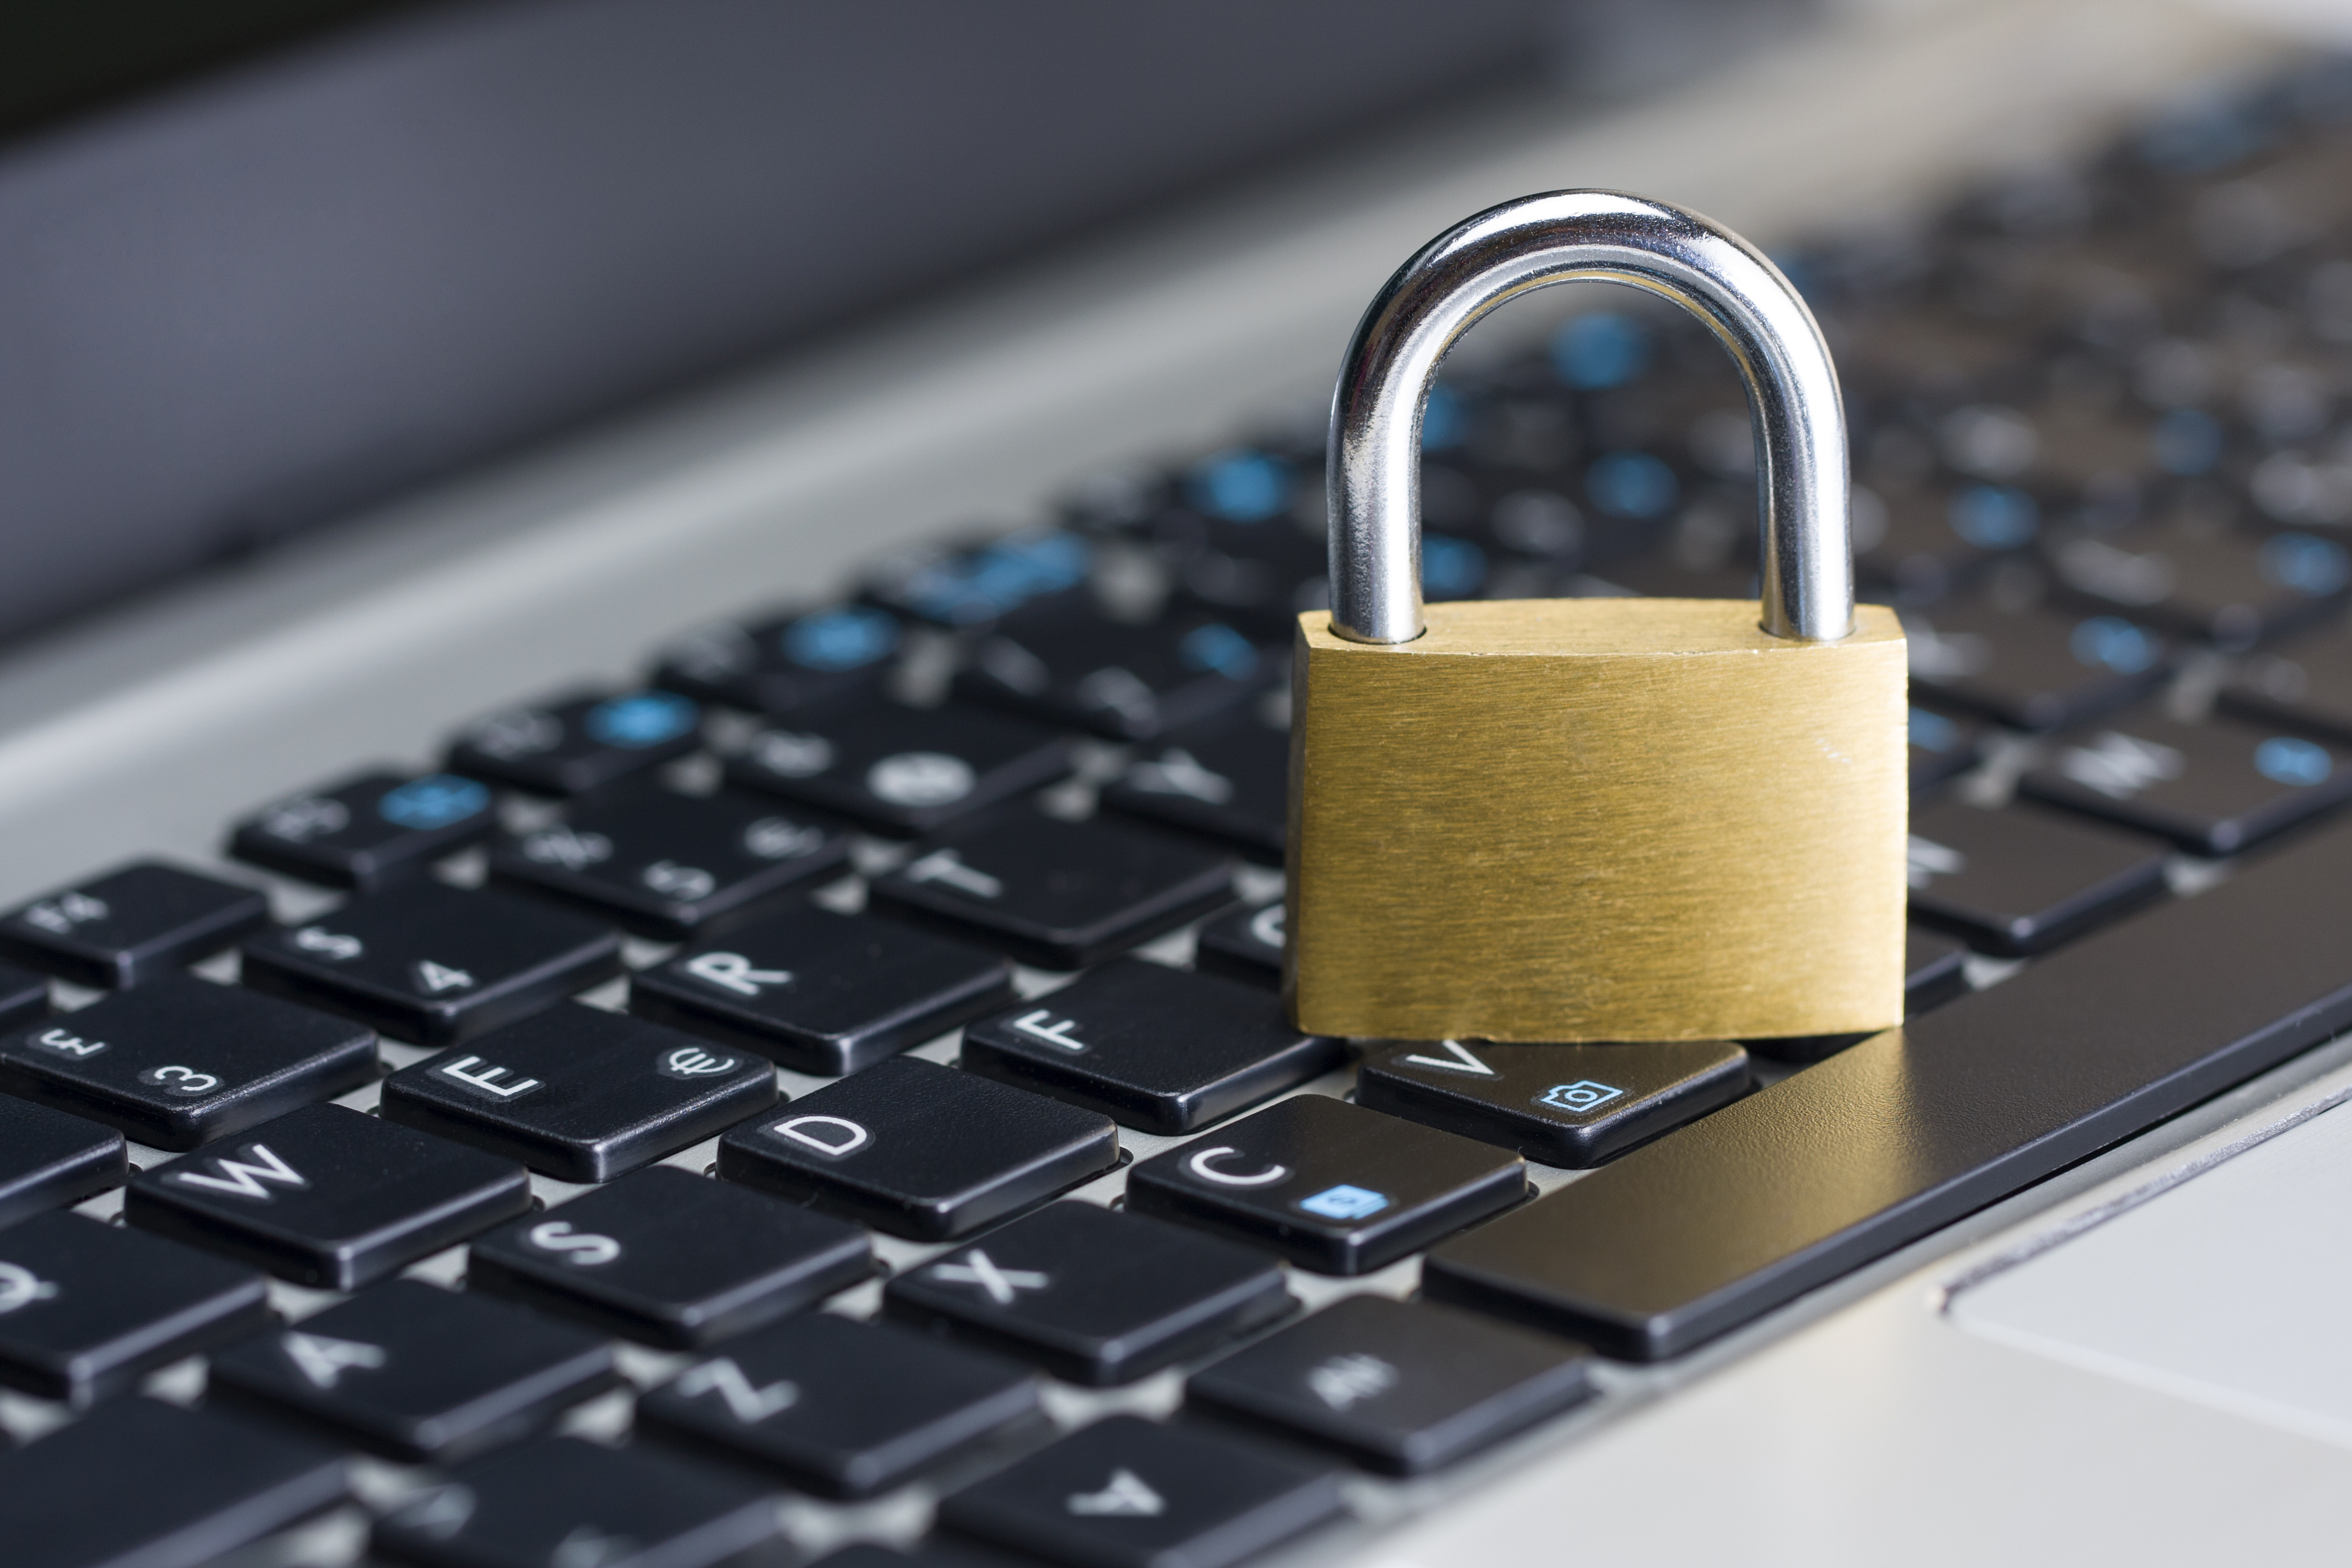 How to strengthen the weakest link in your cyber security chain